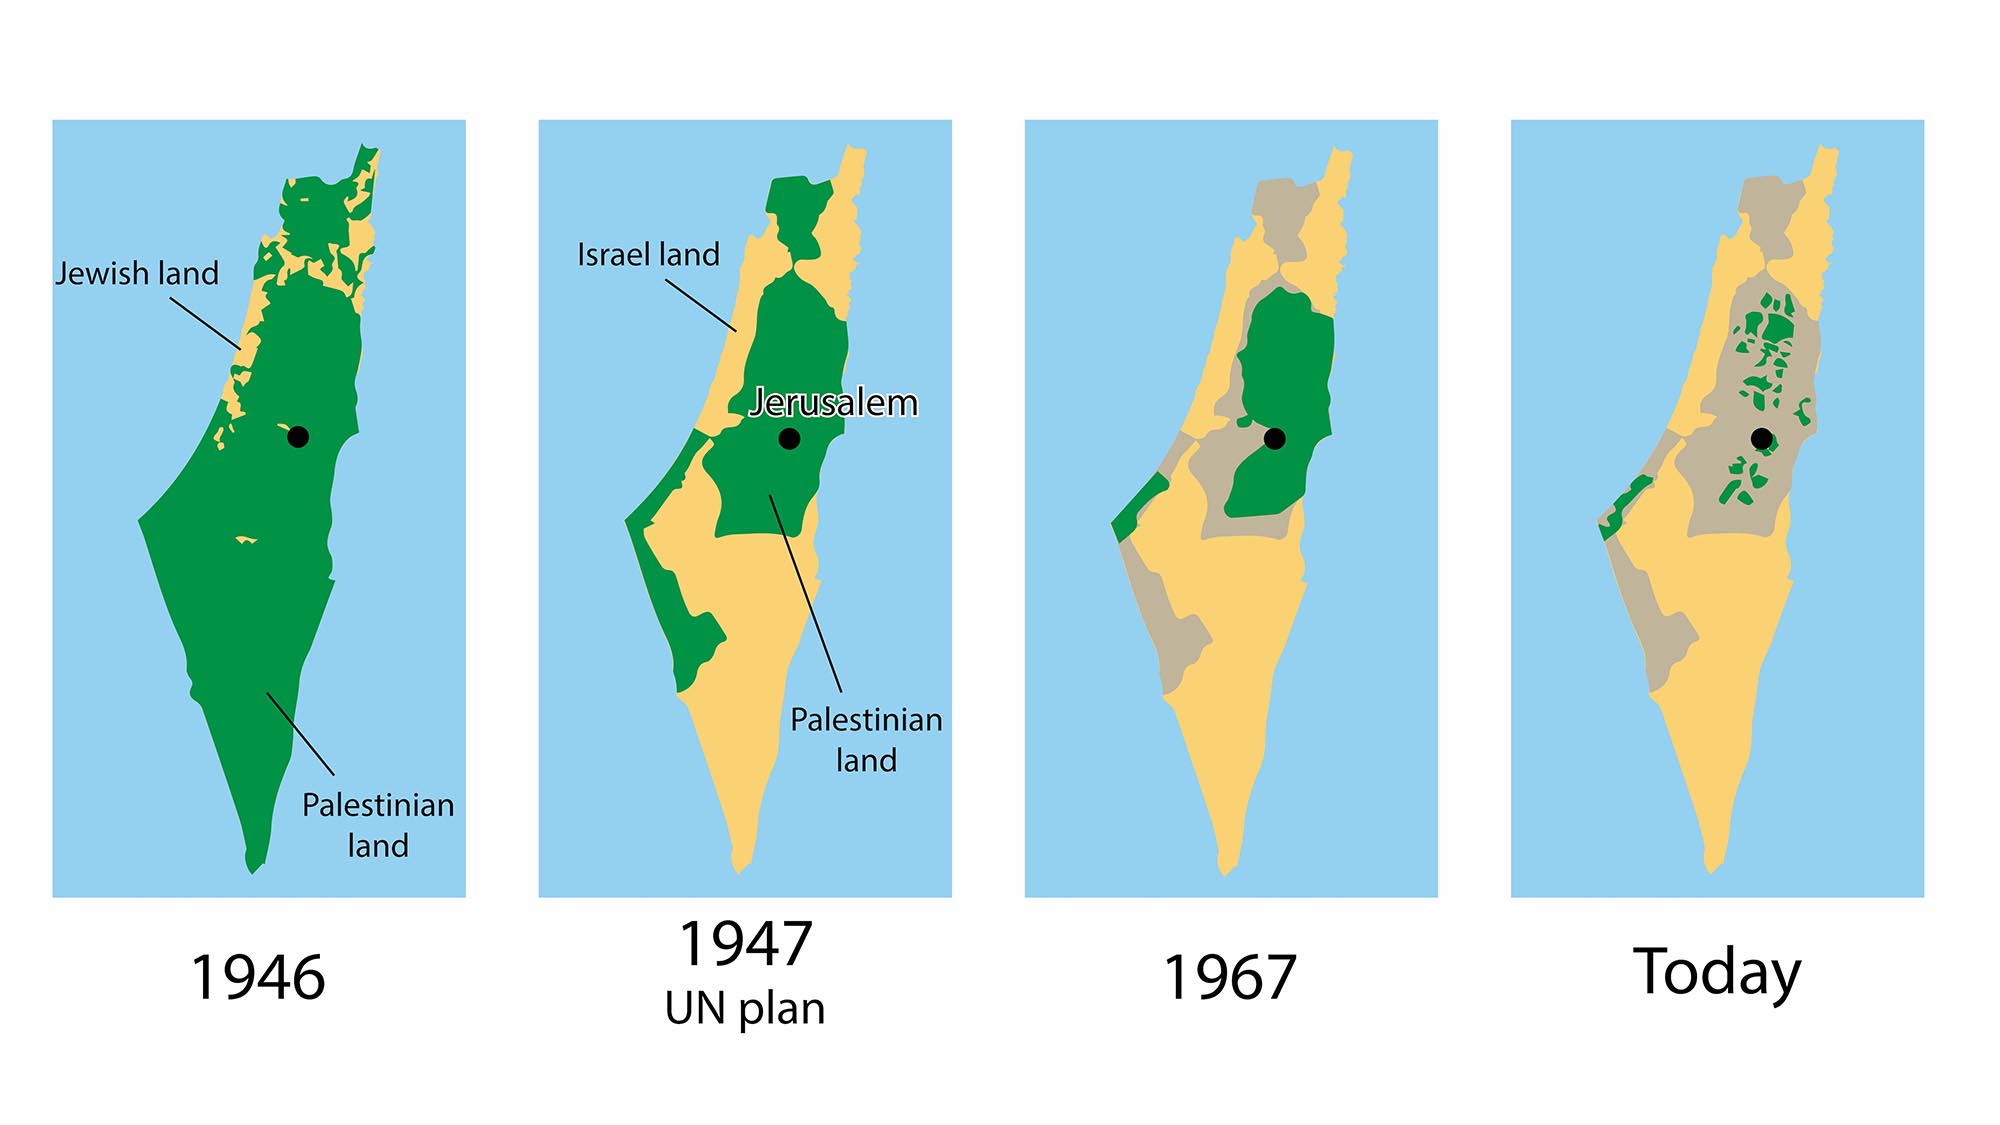 The Middle East conflict and the two-state solution